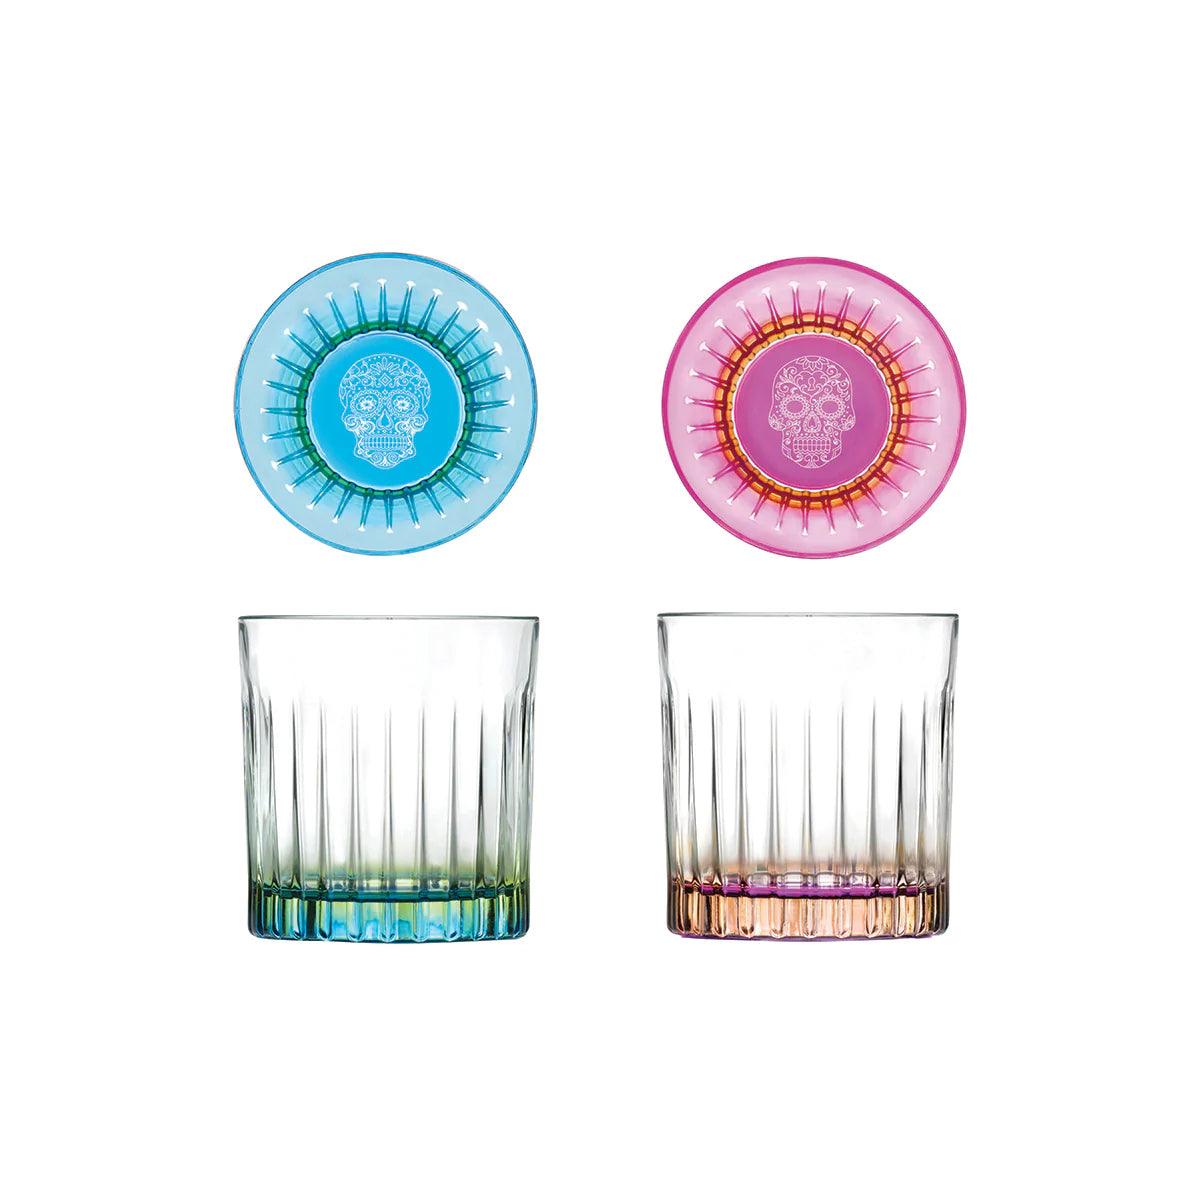 Limited Mexican Edition - Pedro & Rosa Premium Crystal Whiskey Tumblers, Italy (Set of 6) - Happyware Home Pvt Ltd